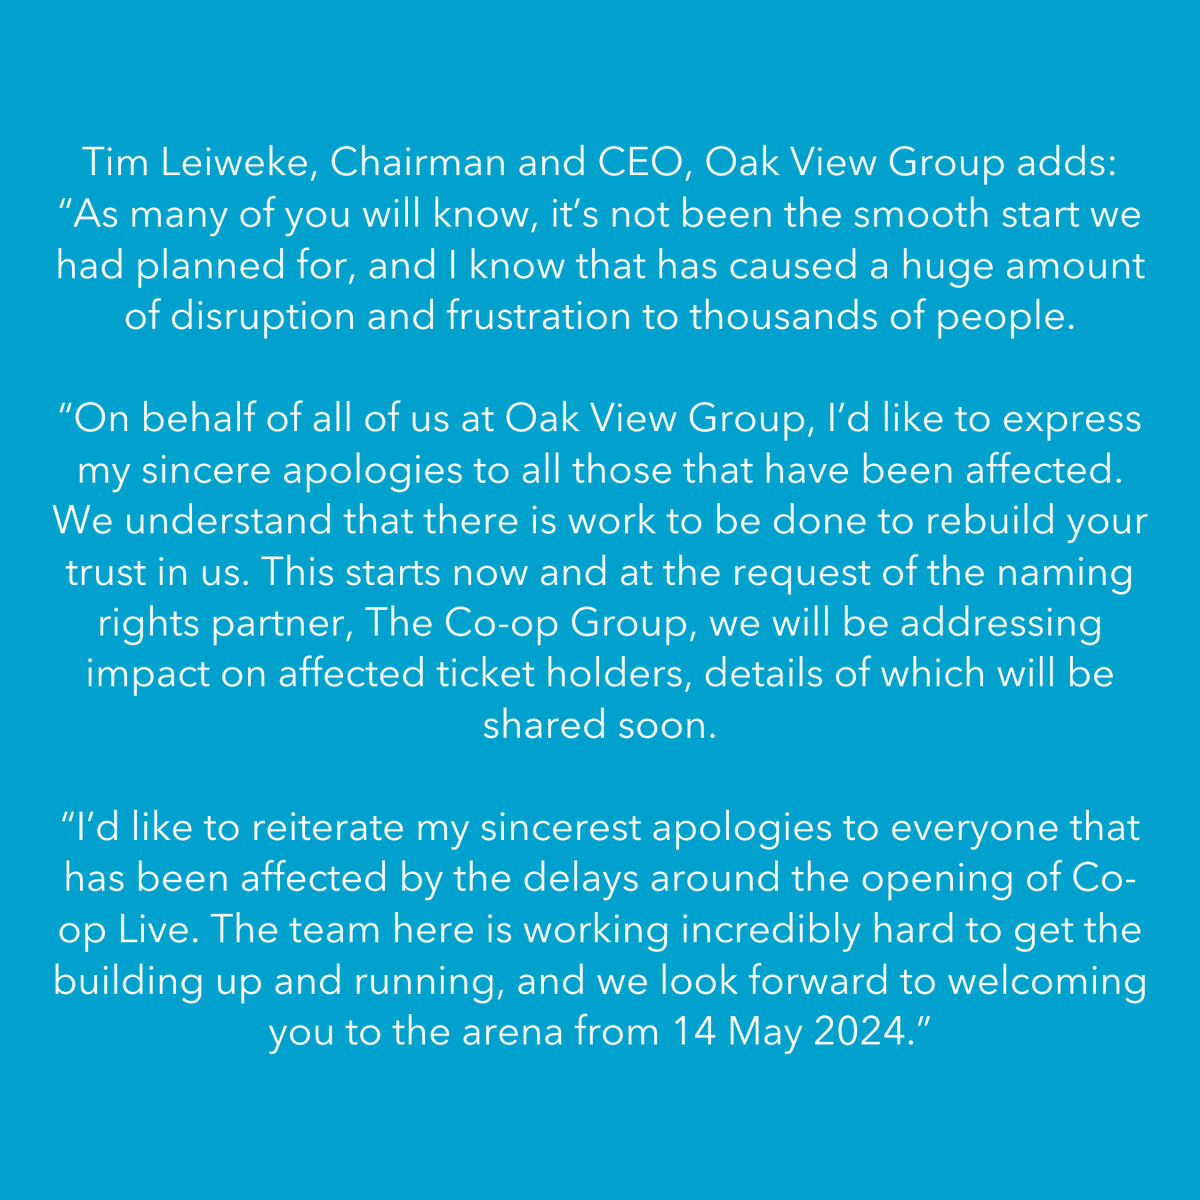 AN IMPORTANT UPDATE FROM OAK VIEW GROUP